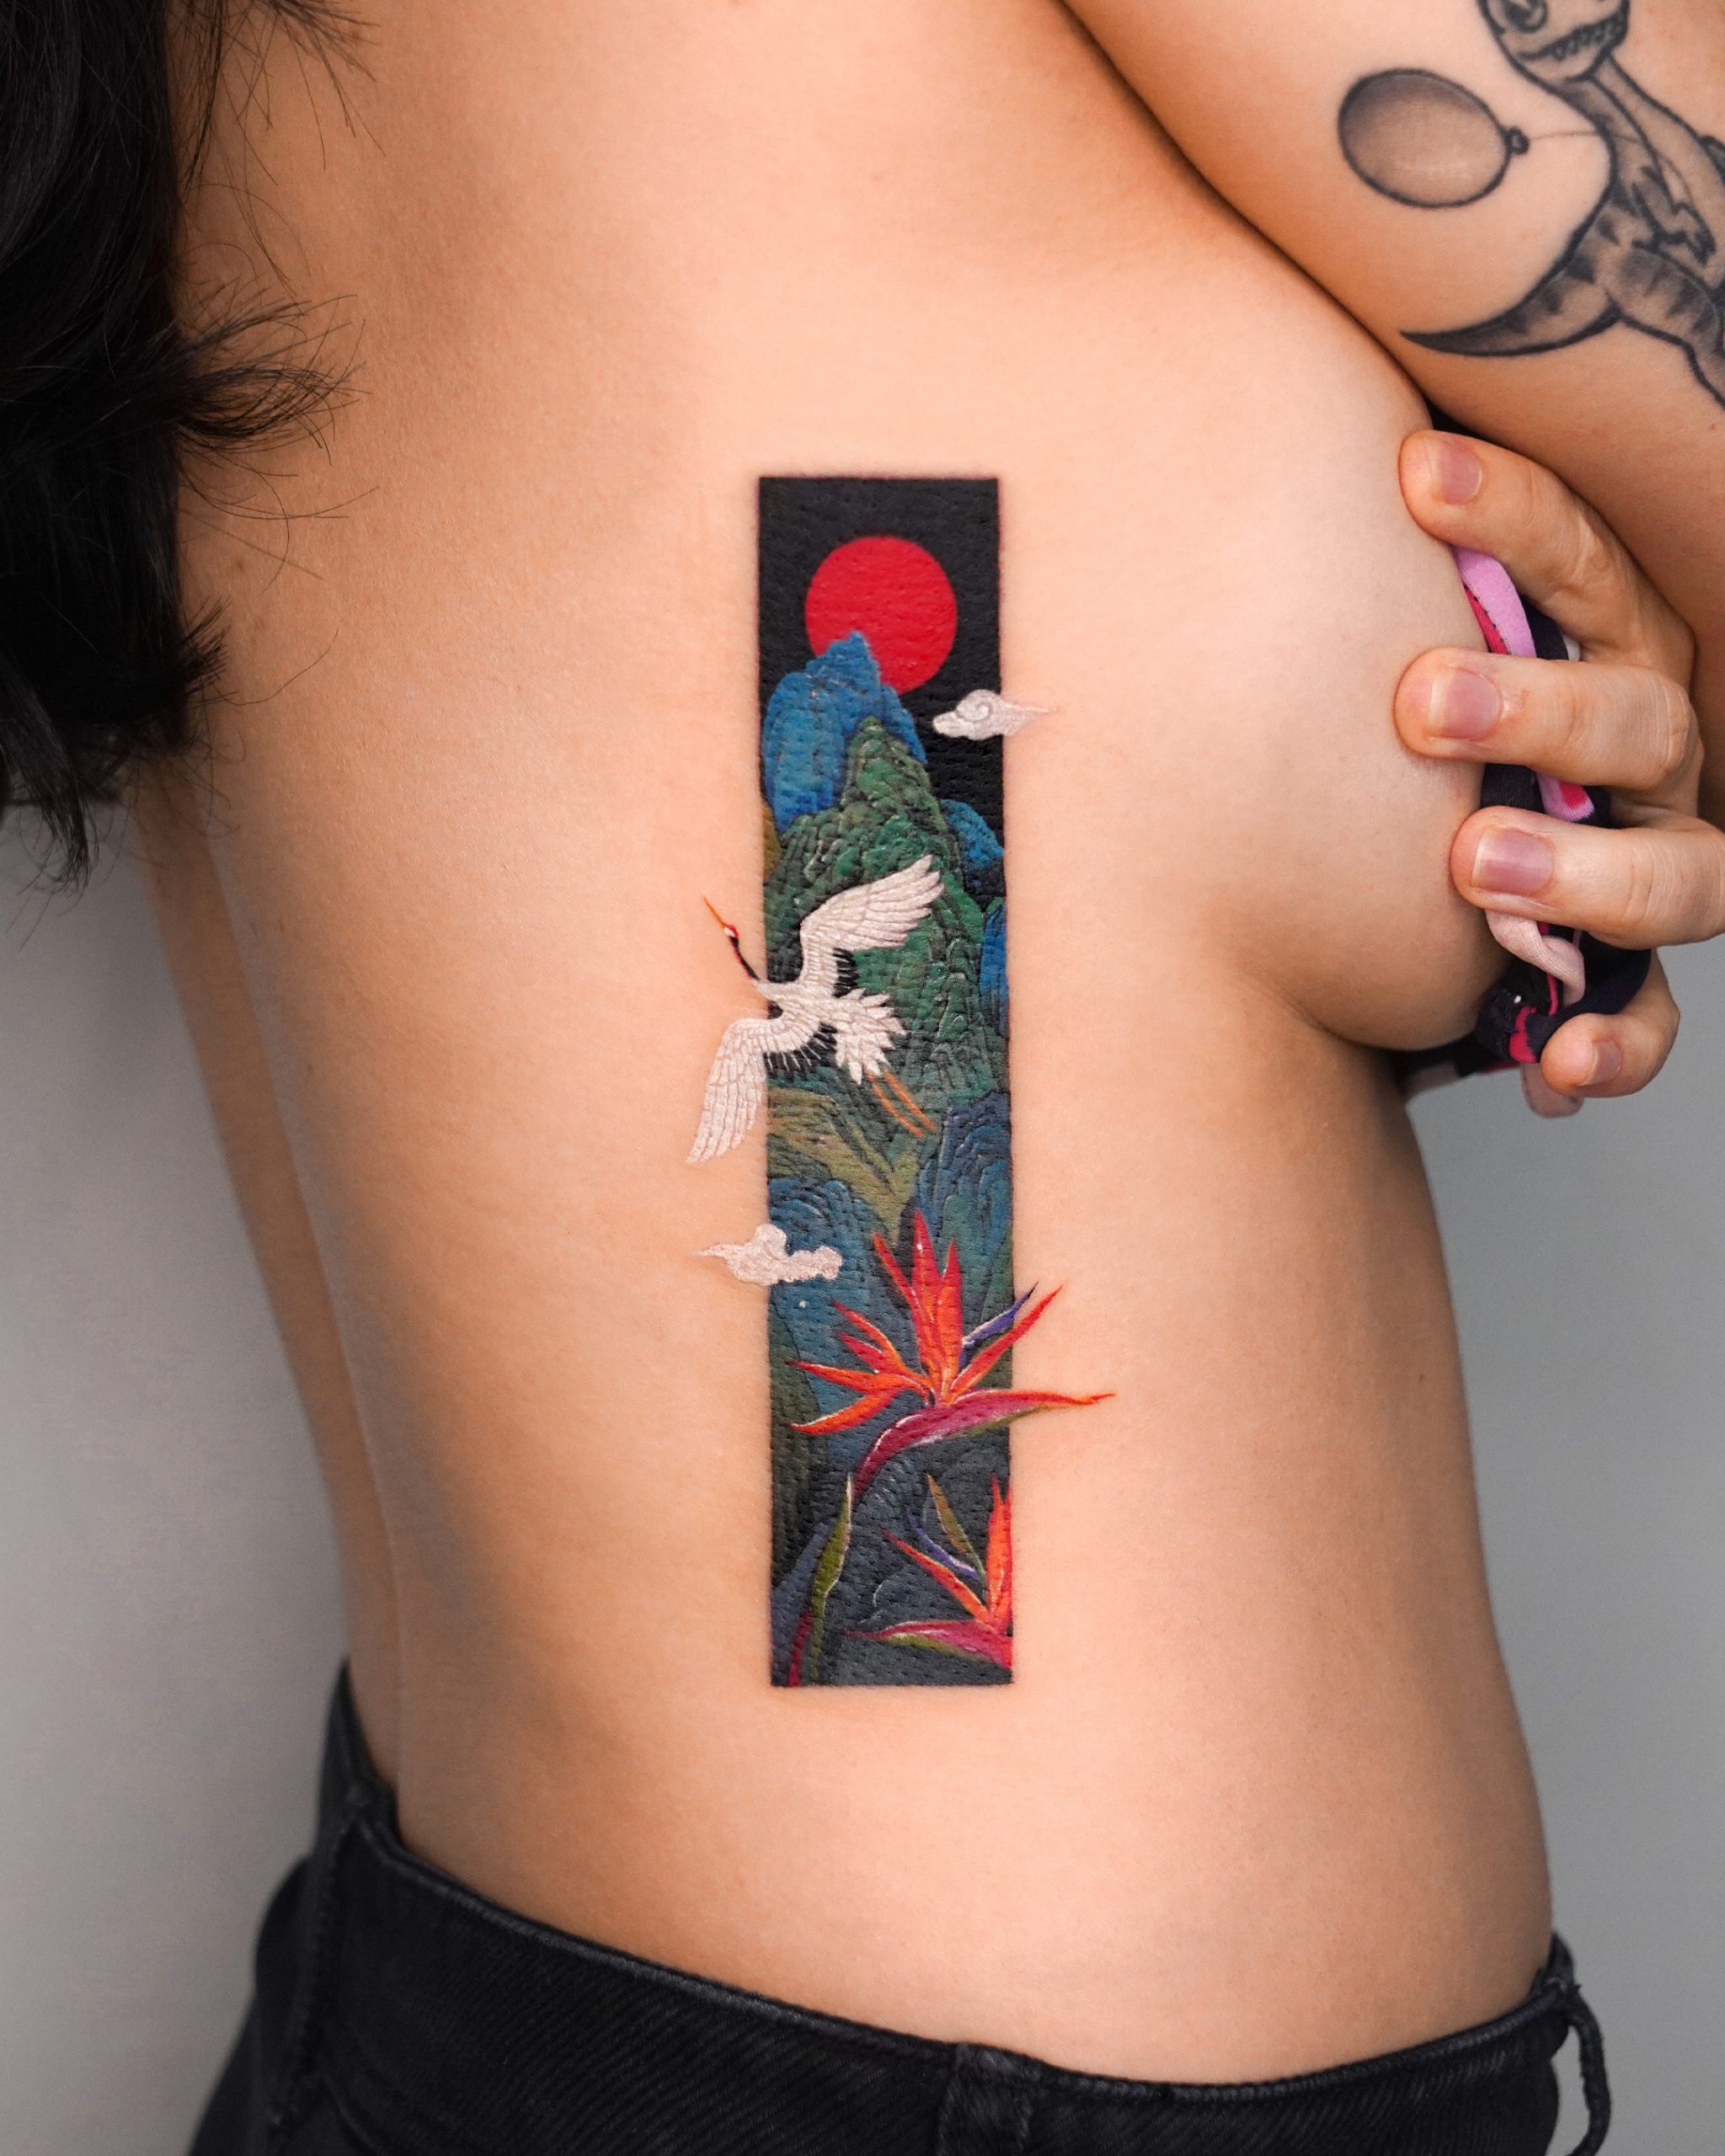 Pimples on tattoos Causes treatments and prevention